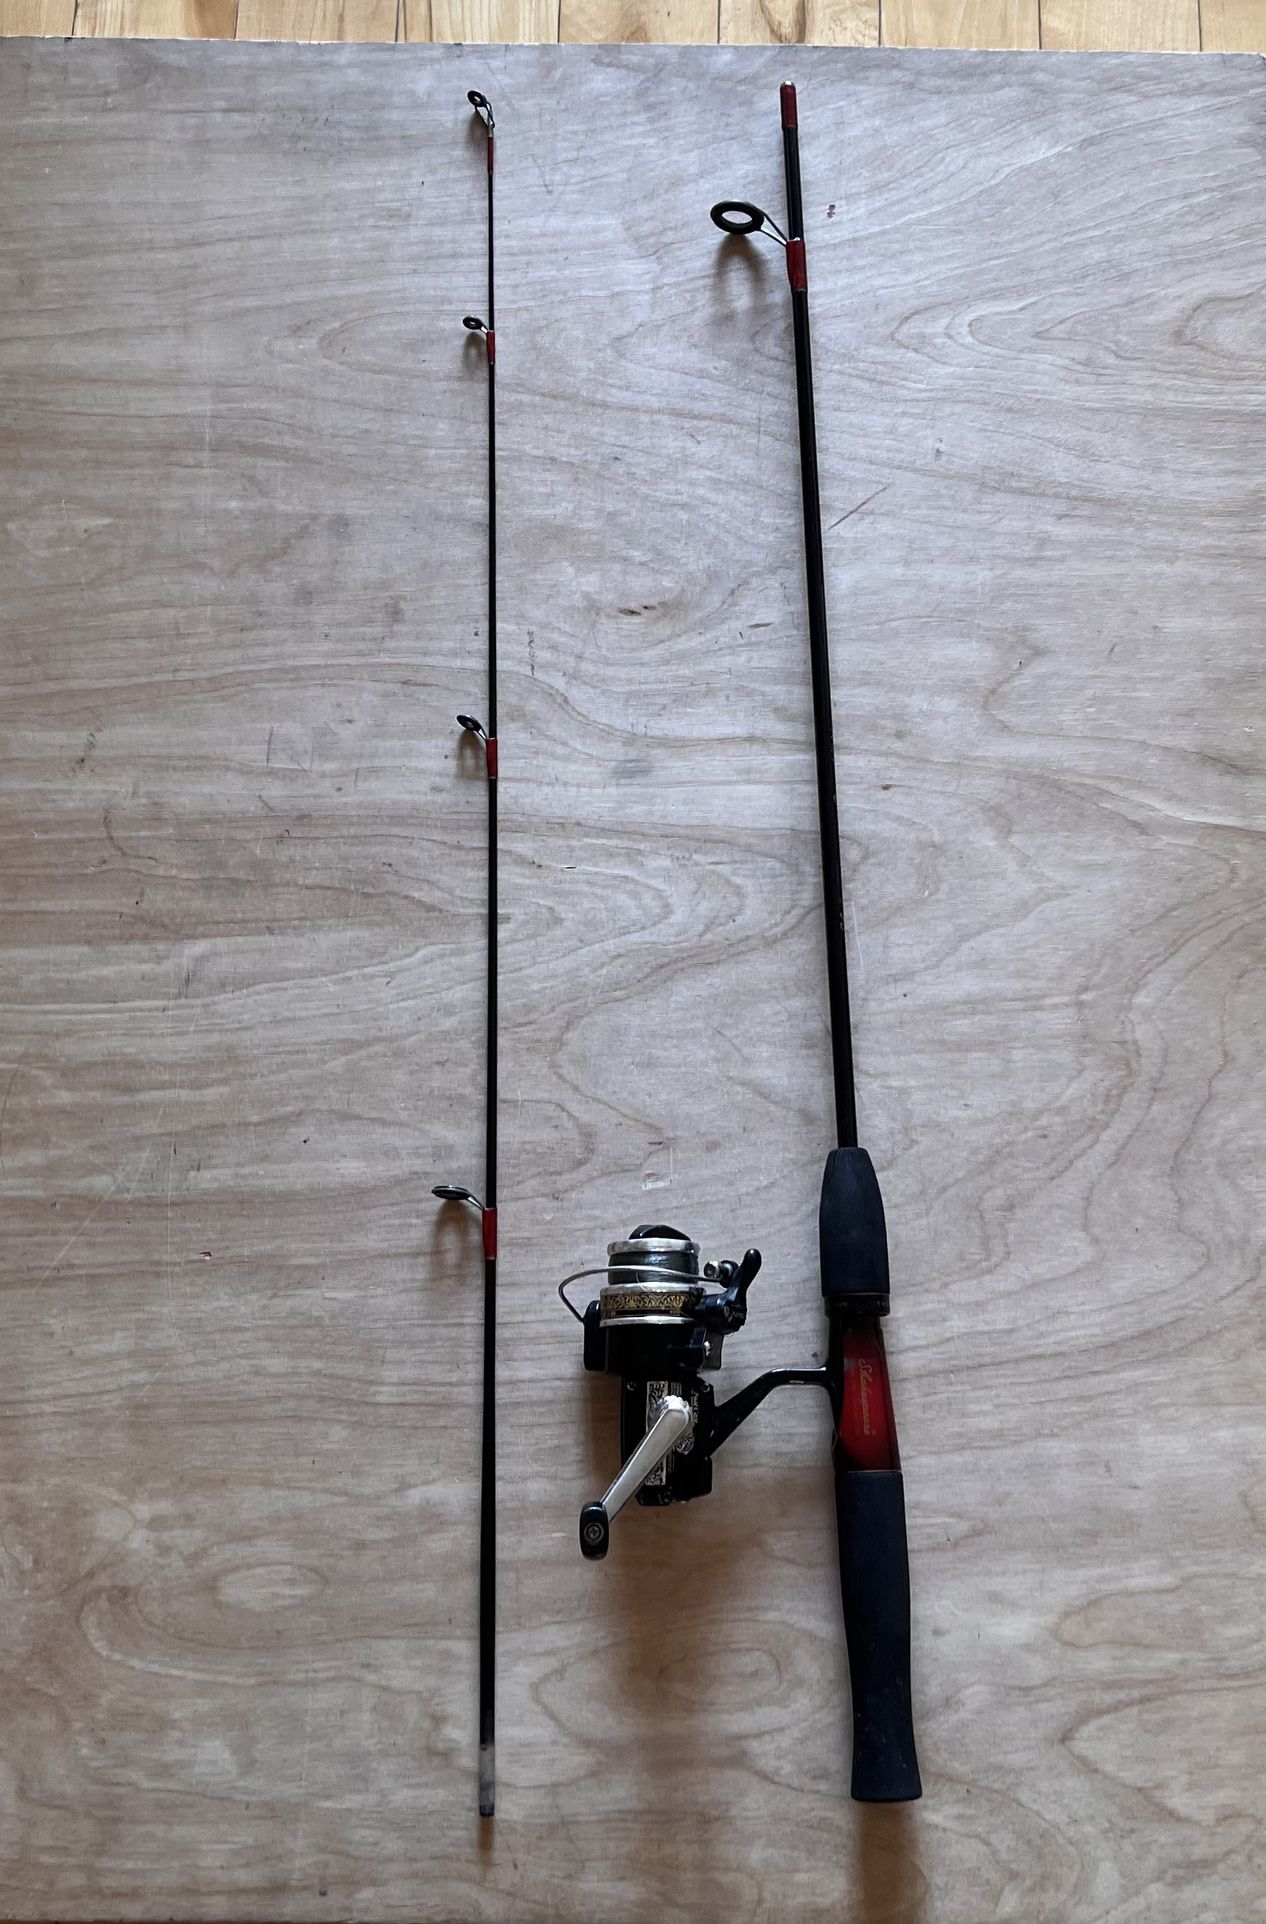 Shakespeare Ultra Light Fishing Rod And Shimano Reel, Trout, Crappie, New